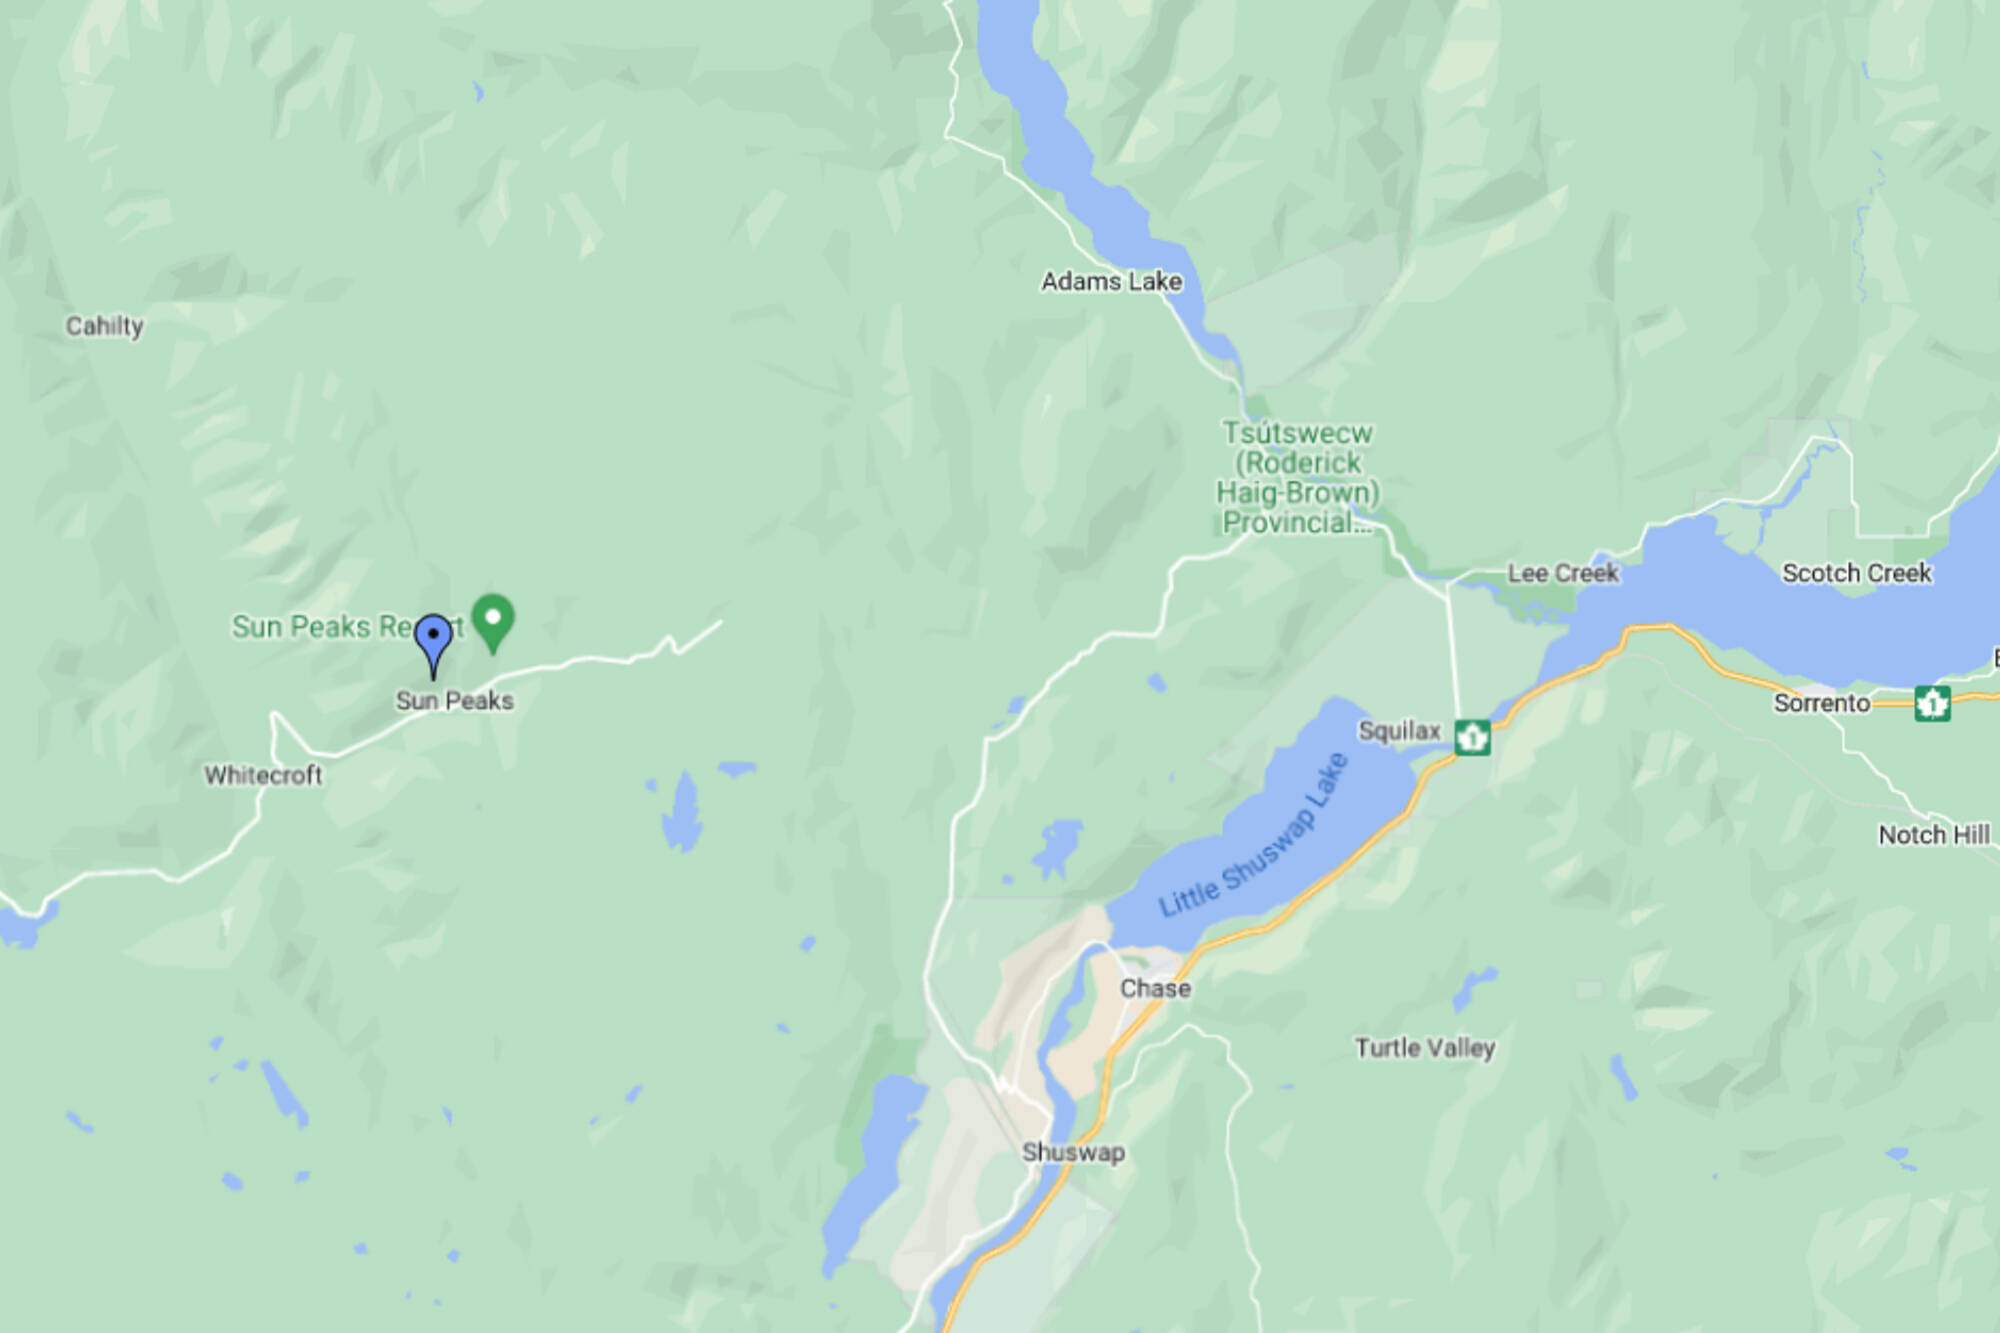 Maps guide drivers to impassable terrain on way to Sun Peaks Resort, Chase RCMP responds to 911 calls. (Google Maps image)